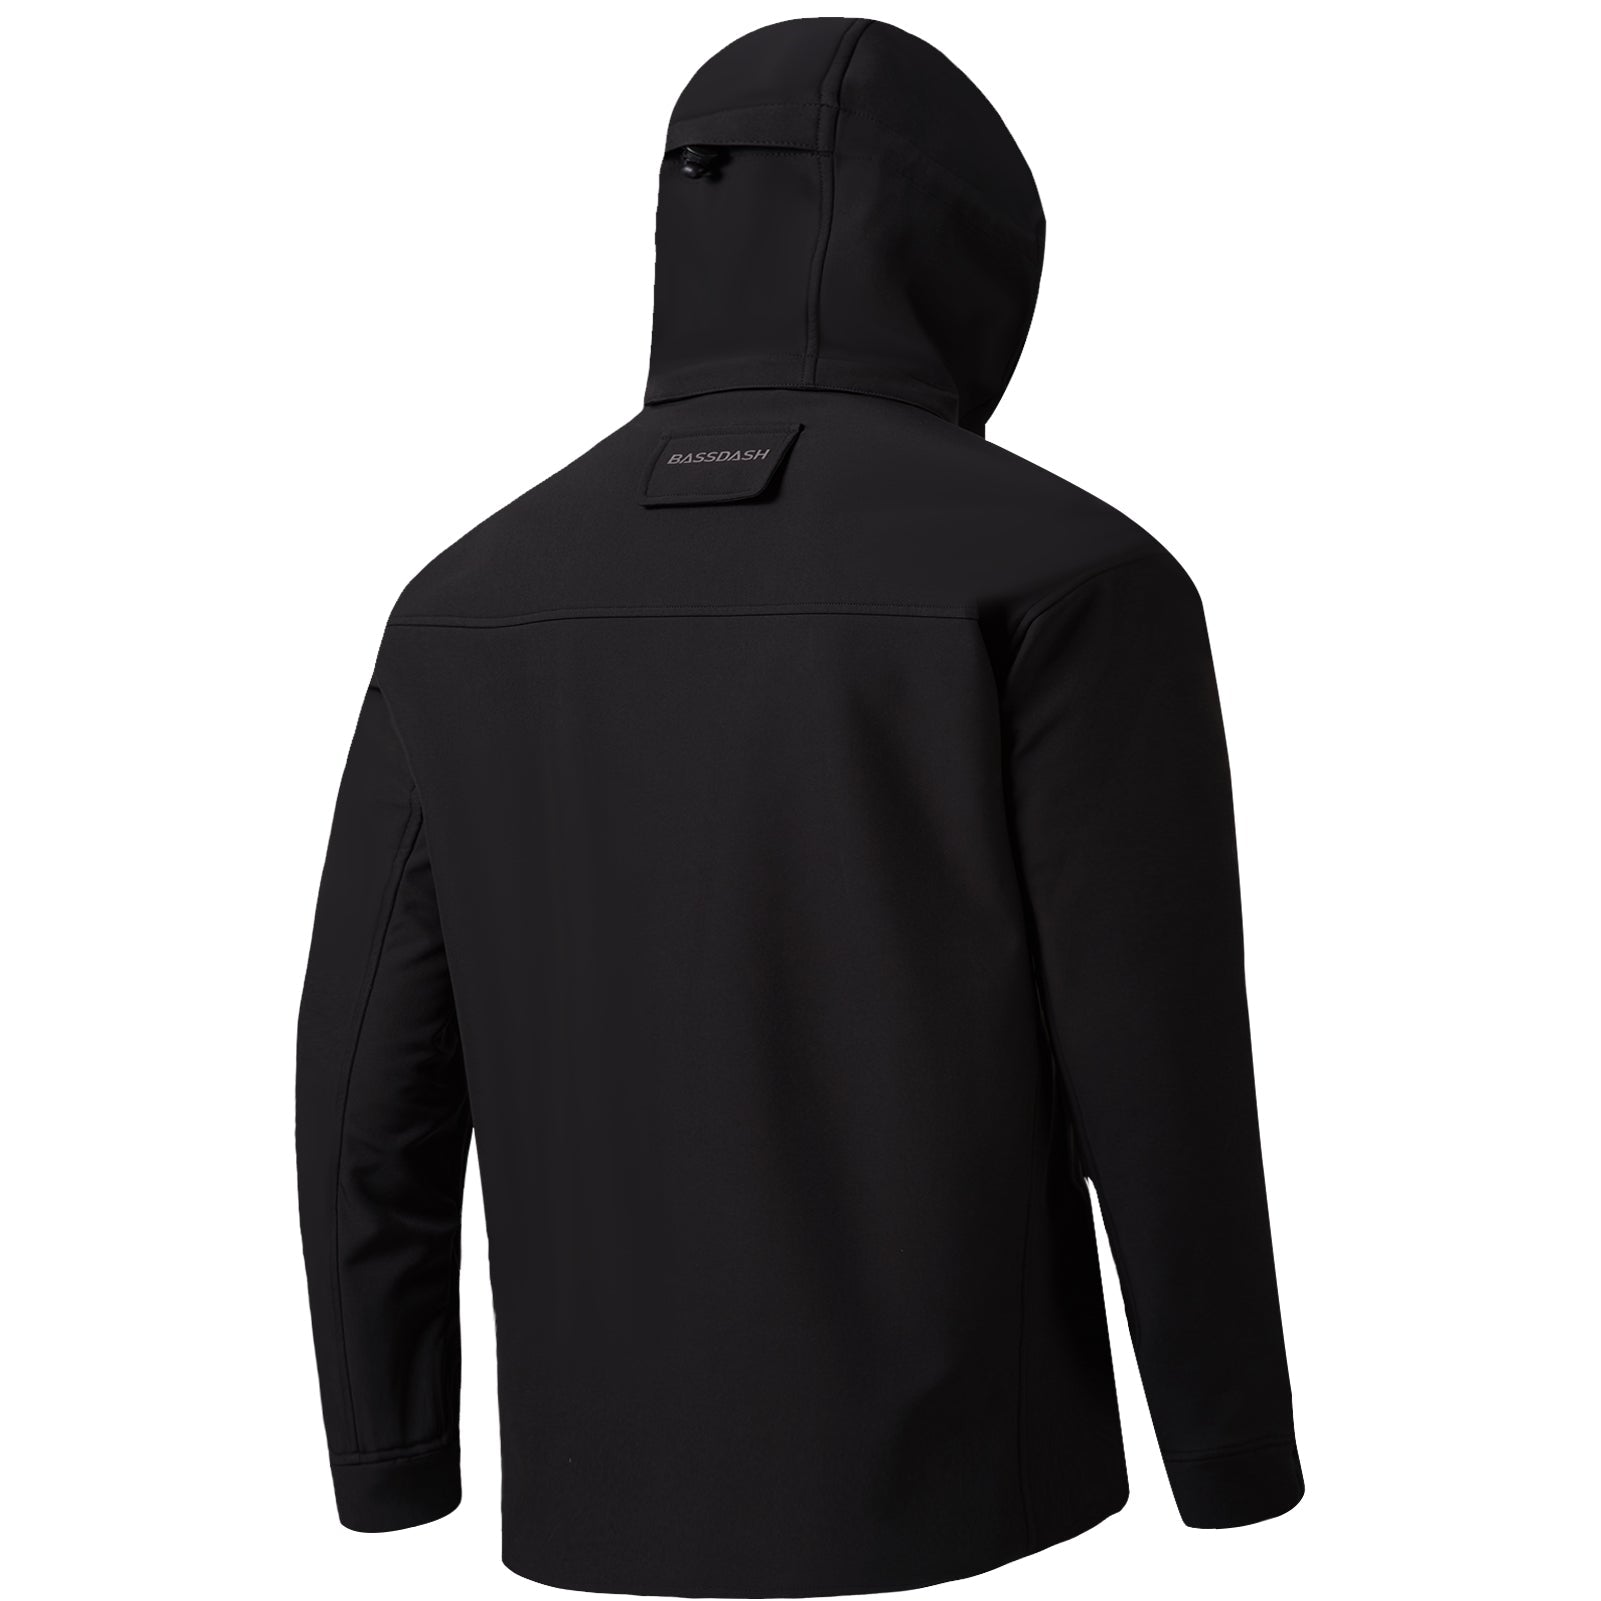 Men's Waterproof Softshell Jackets with Face Cover